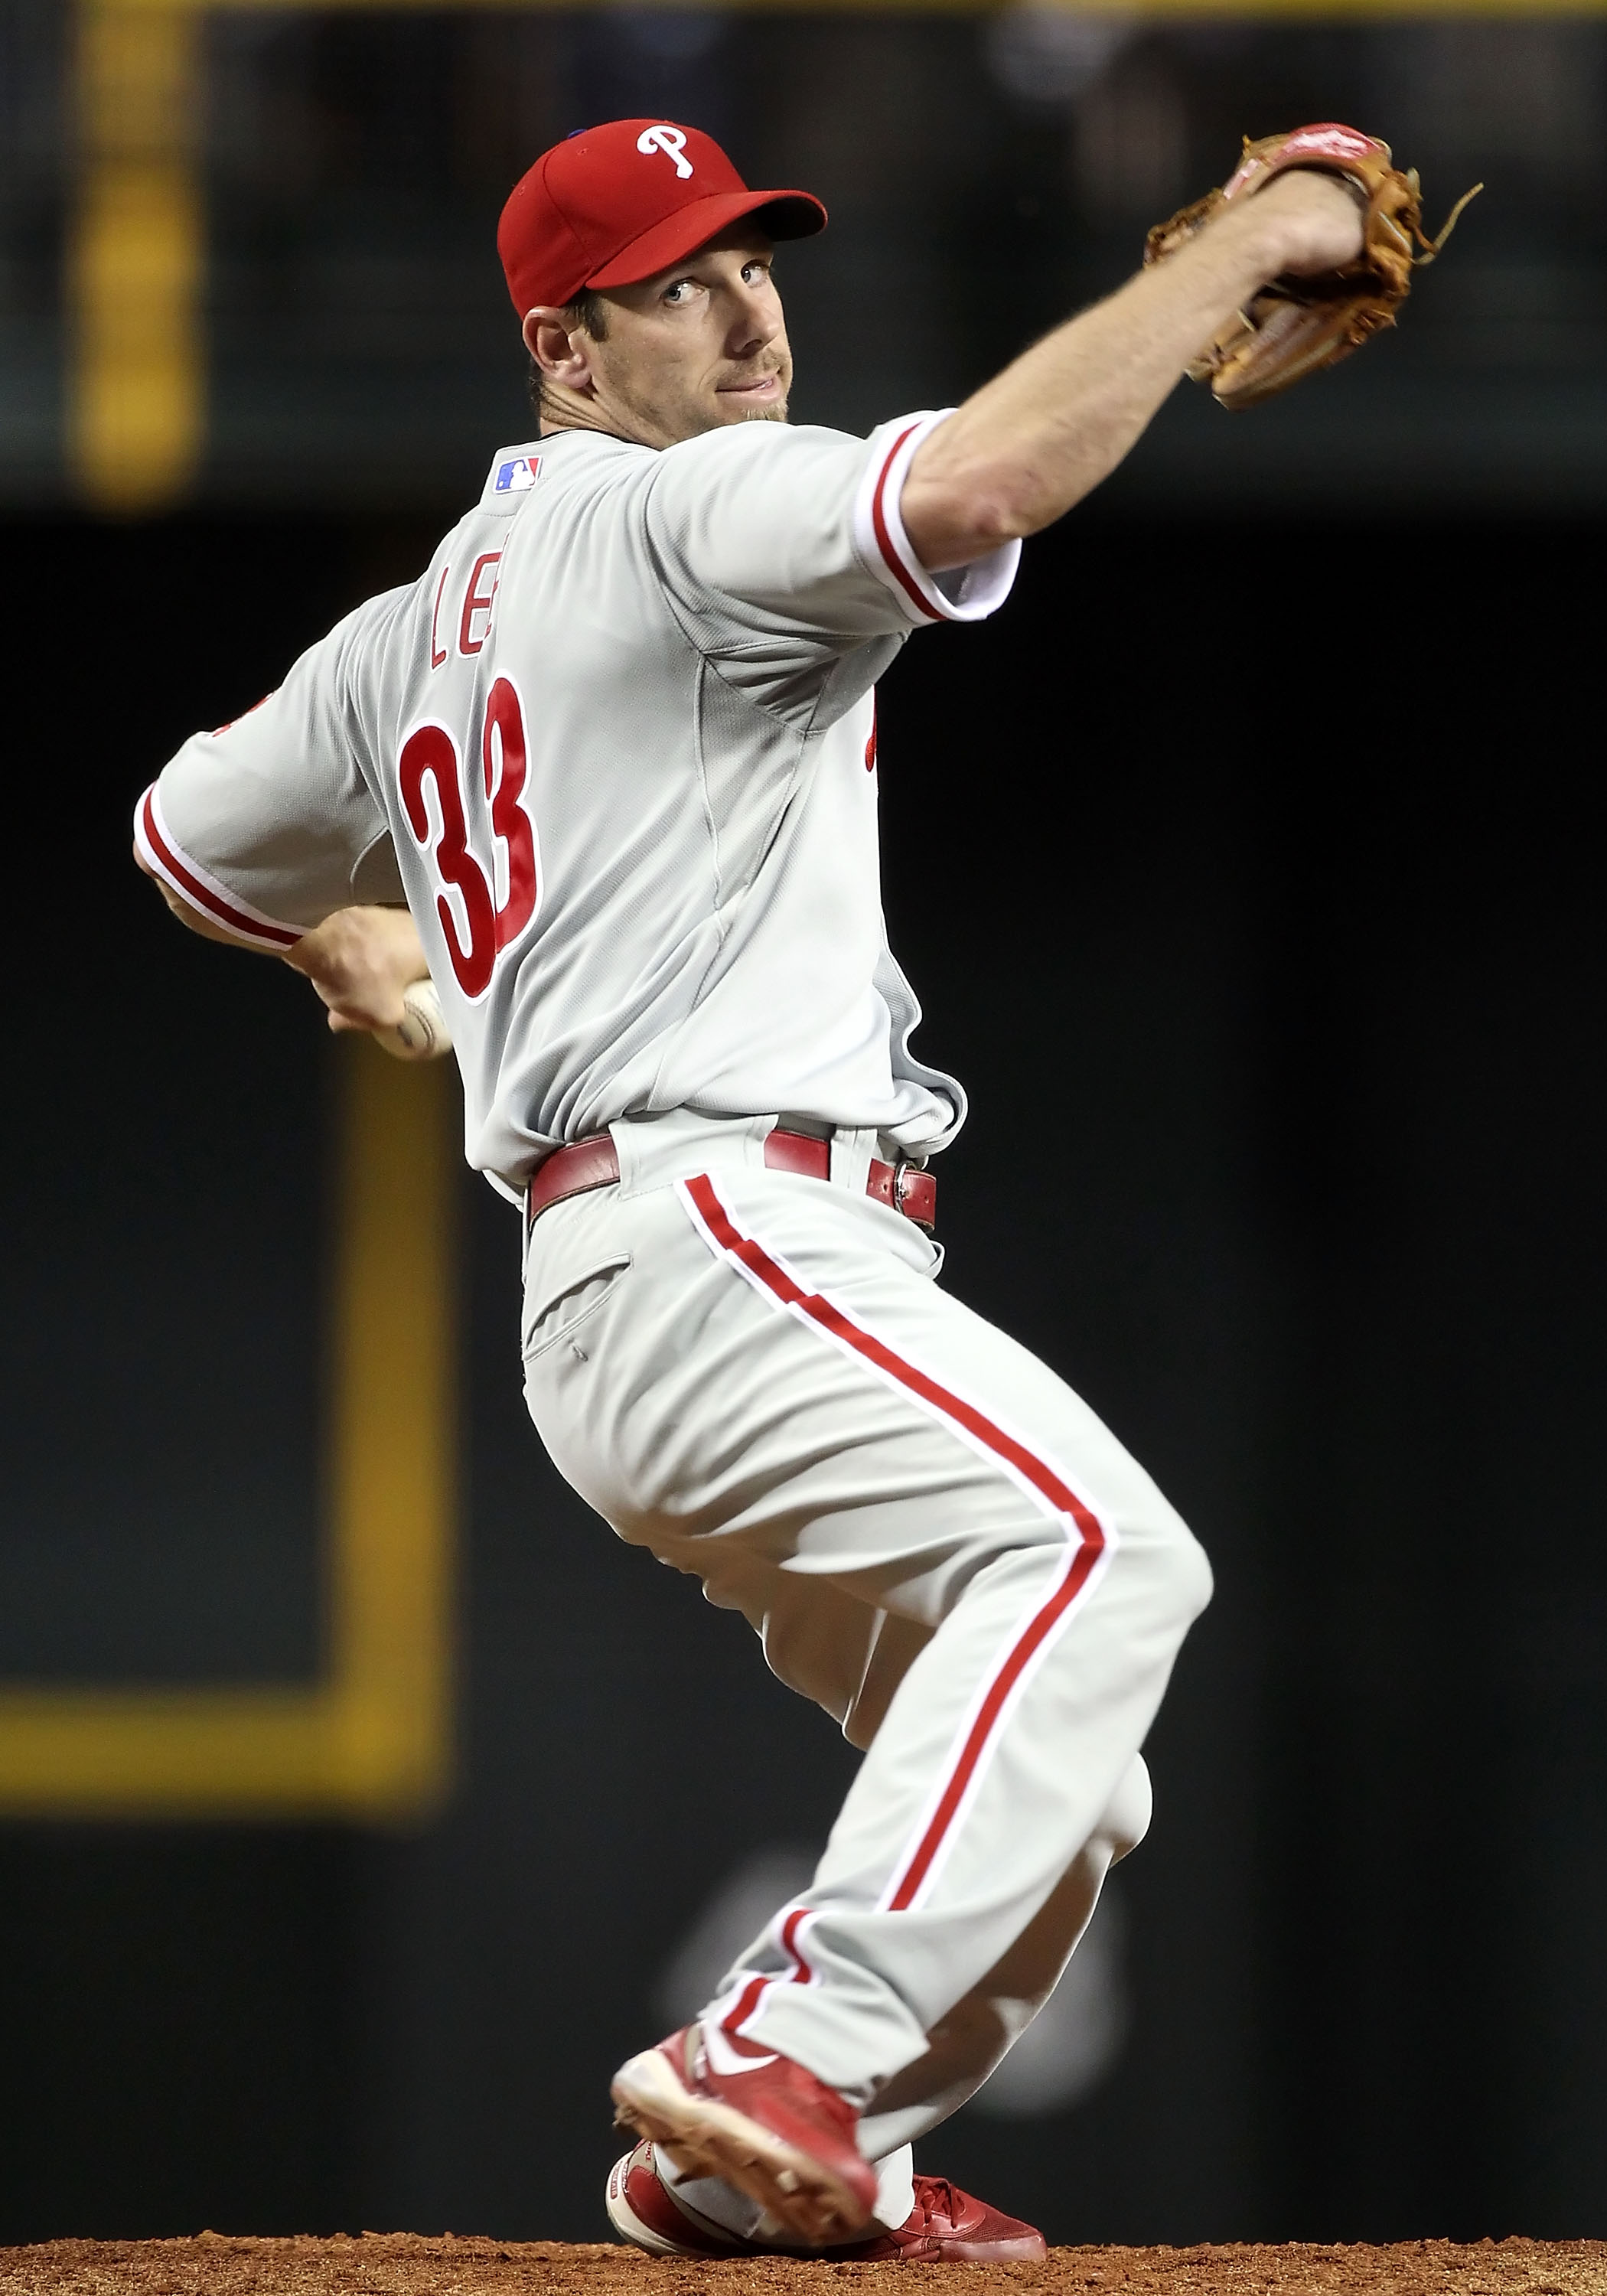 PHOENIX, AZ - APRIL 25:  Starting pitcher Cliff Lee #33 of the Philadelphia Phillies pitches against the Arizona Diamondbacks during the Major League Baseball game at Chase Field on April 25, 2011 in Phoenix, Arizona.  The Diamondbacks defeated the Philli